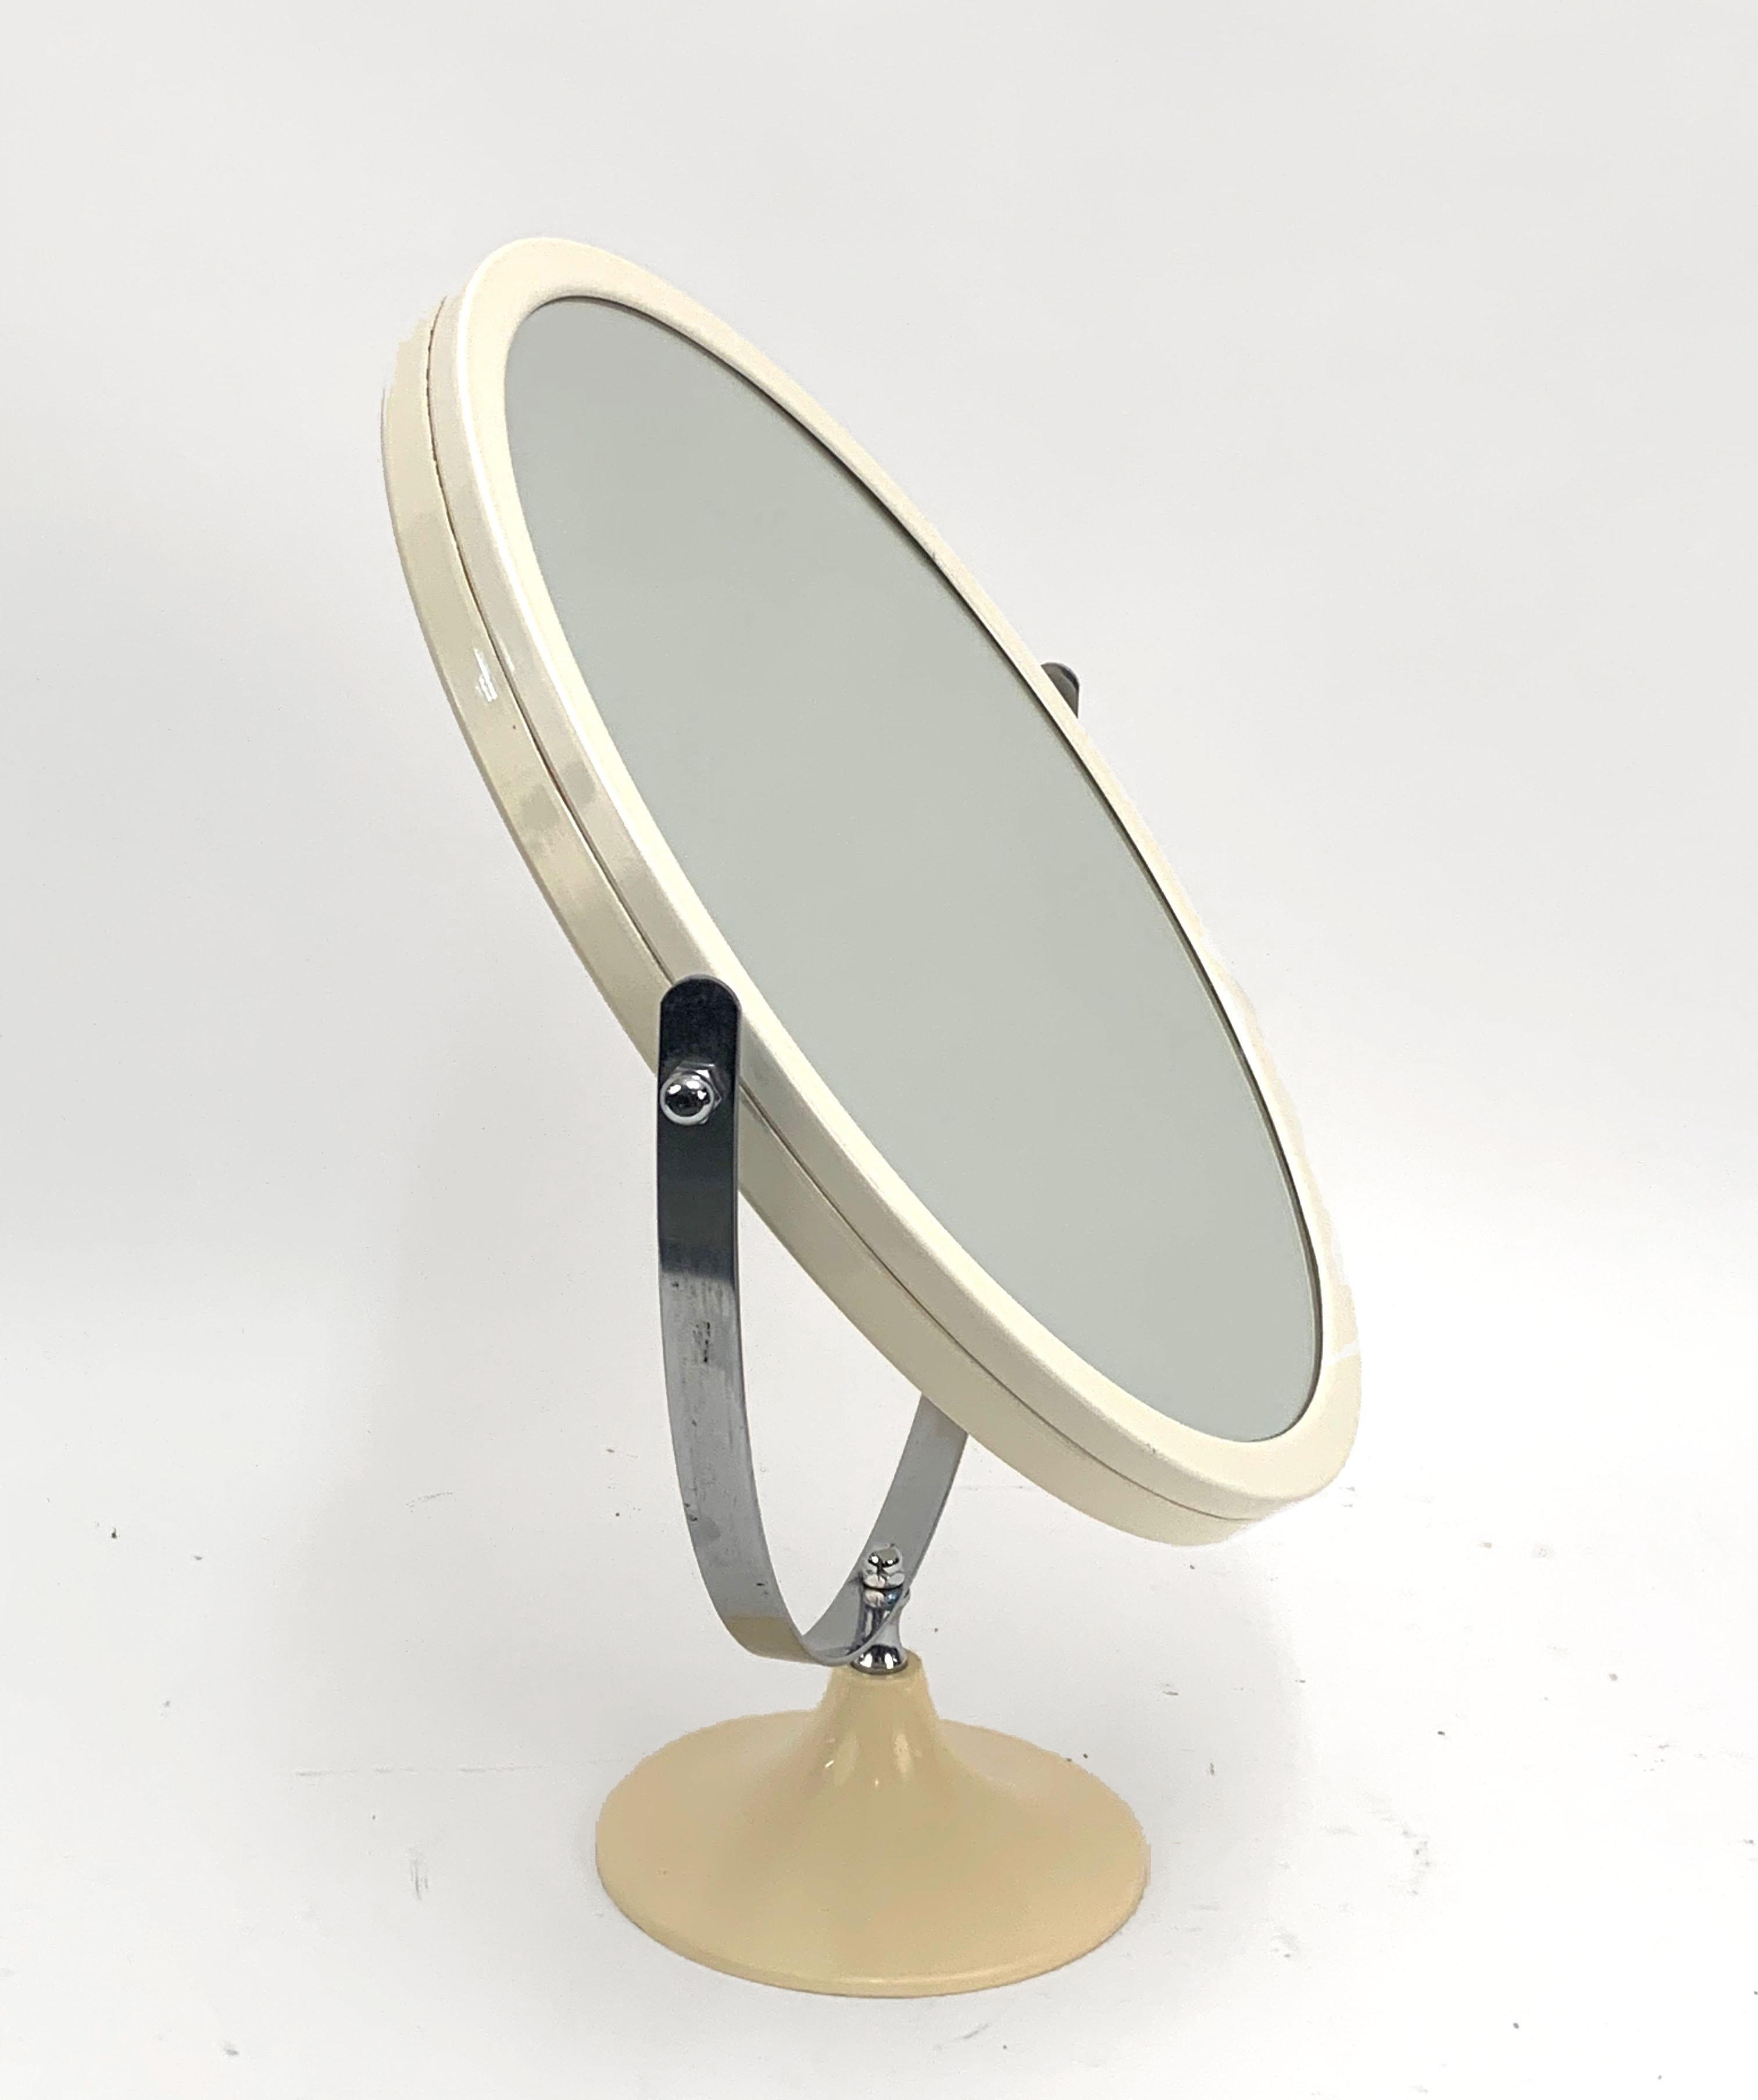 Wonderful midcentury metal and white plastic round table mirror. This amazing item was produced in Italy during 1980s.

This surprising piece is composed of a rotating white plastic mirror on a metal structure. The condition is vintage since the